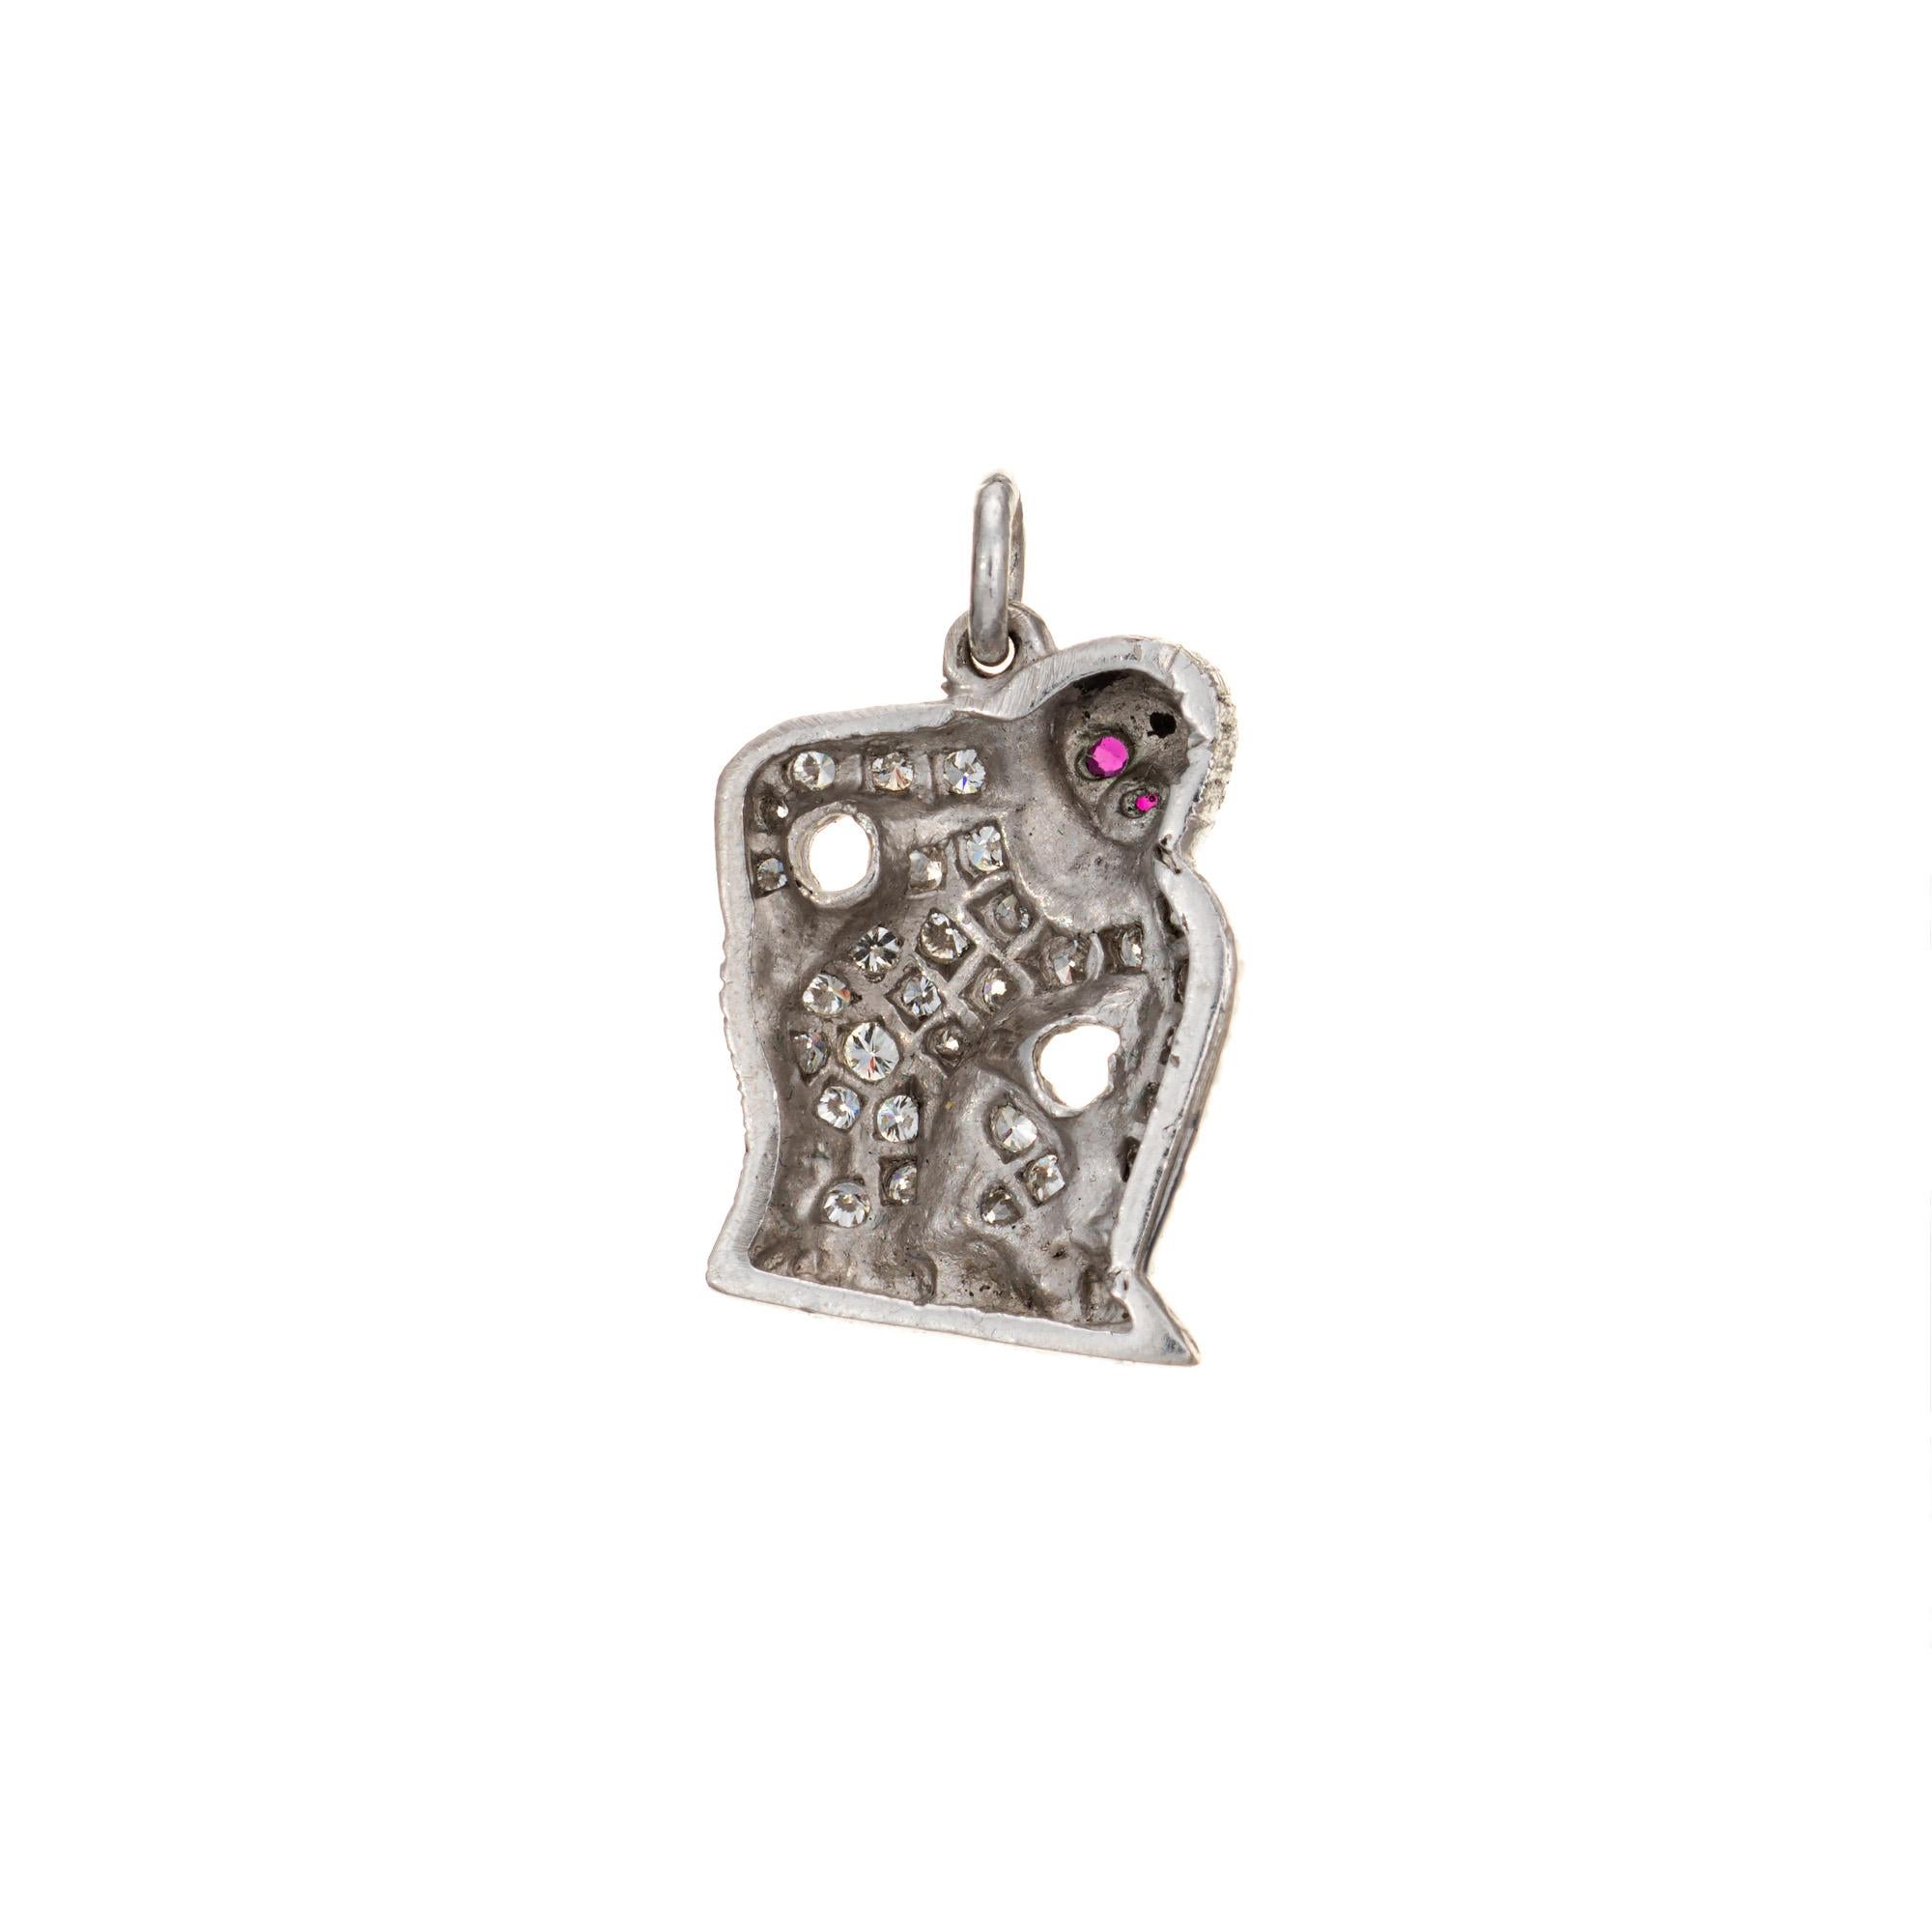 Finely detailed vintage Art Deco era charm crafted in 900 platinum (circa 1920s to 1930s).  

28 round brilliant cut diamonds total an estimated 0.10 carats (estimated at H-I color and VS2-SI1 clarity). Two rubies are set into the eyes (0.01 carat